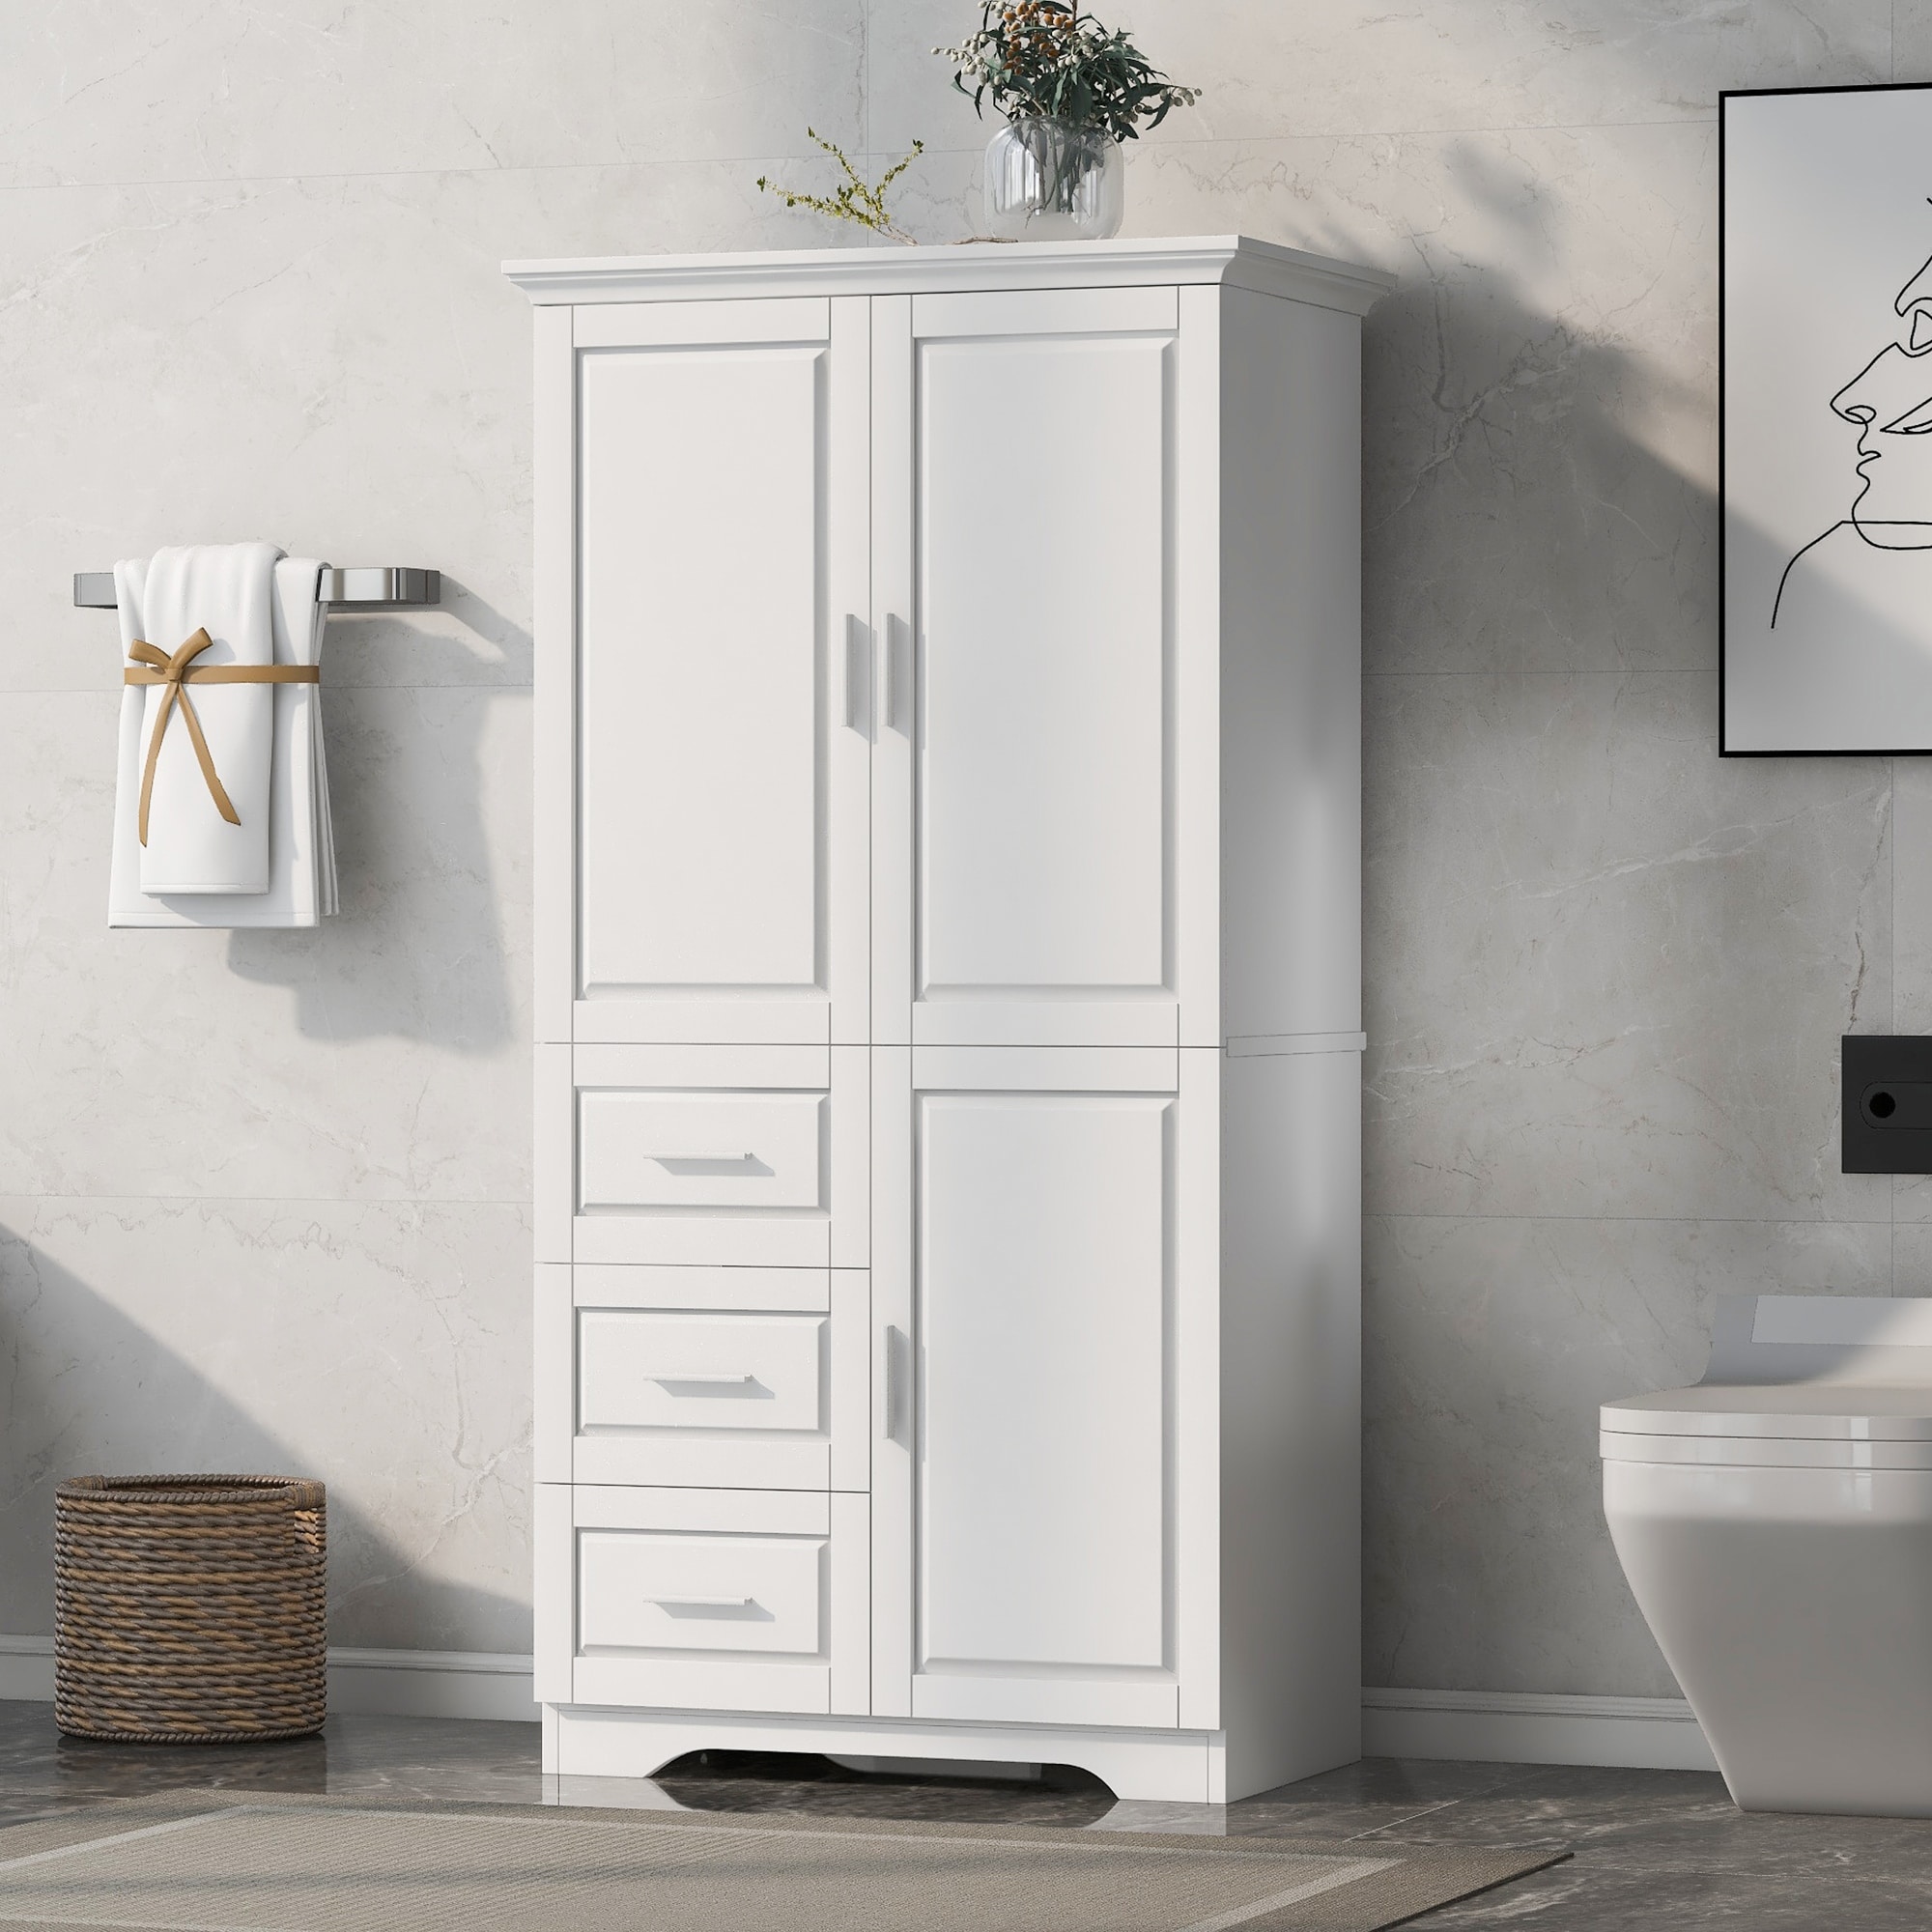 https://ak1.ostkcdn.com/images/products/is/images/direct/36398b8cb37ccbd45bddbdc3e0f499830a35f7db/Tall-and-Wide-Storage-Cabinet-with-Doors-for-Bathroom-Office%2C-Three-Drawers%2C-White.jpg